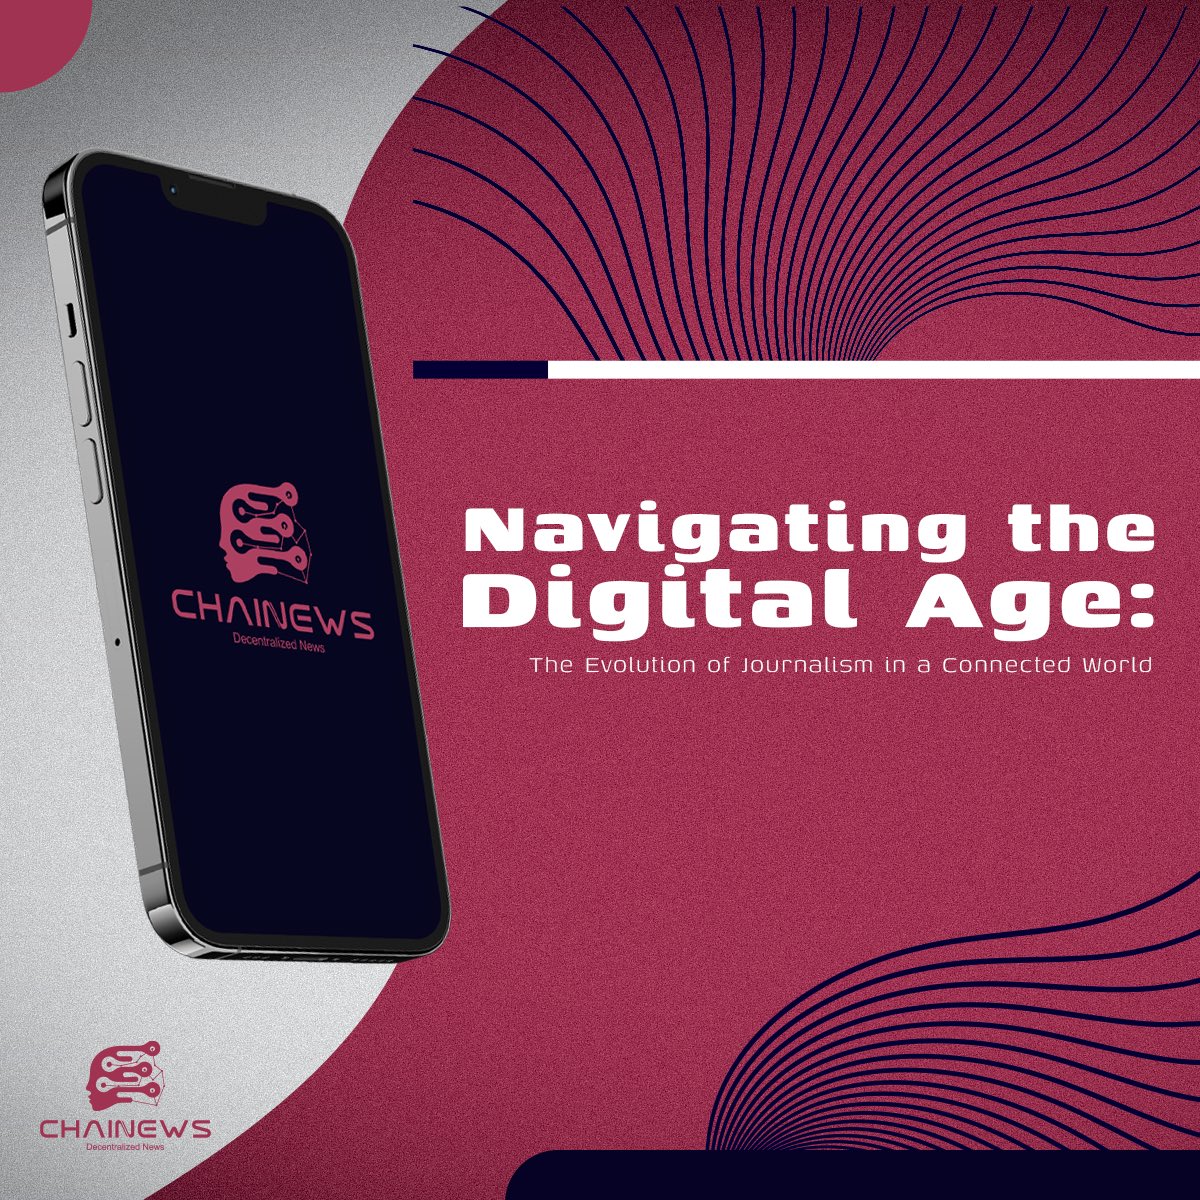 Chainews blog page is online! Our first article; Navigating the Digital Age. You can visit our website to read. 🌐 chainews.org #blockchain #blockchaintechnology #blockchainnews #blockchains #blockchainrevolution #blockchainconsulting #blockchaintech #chainews